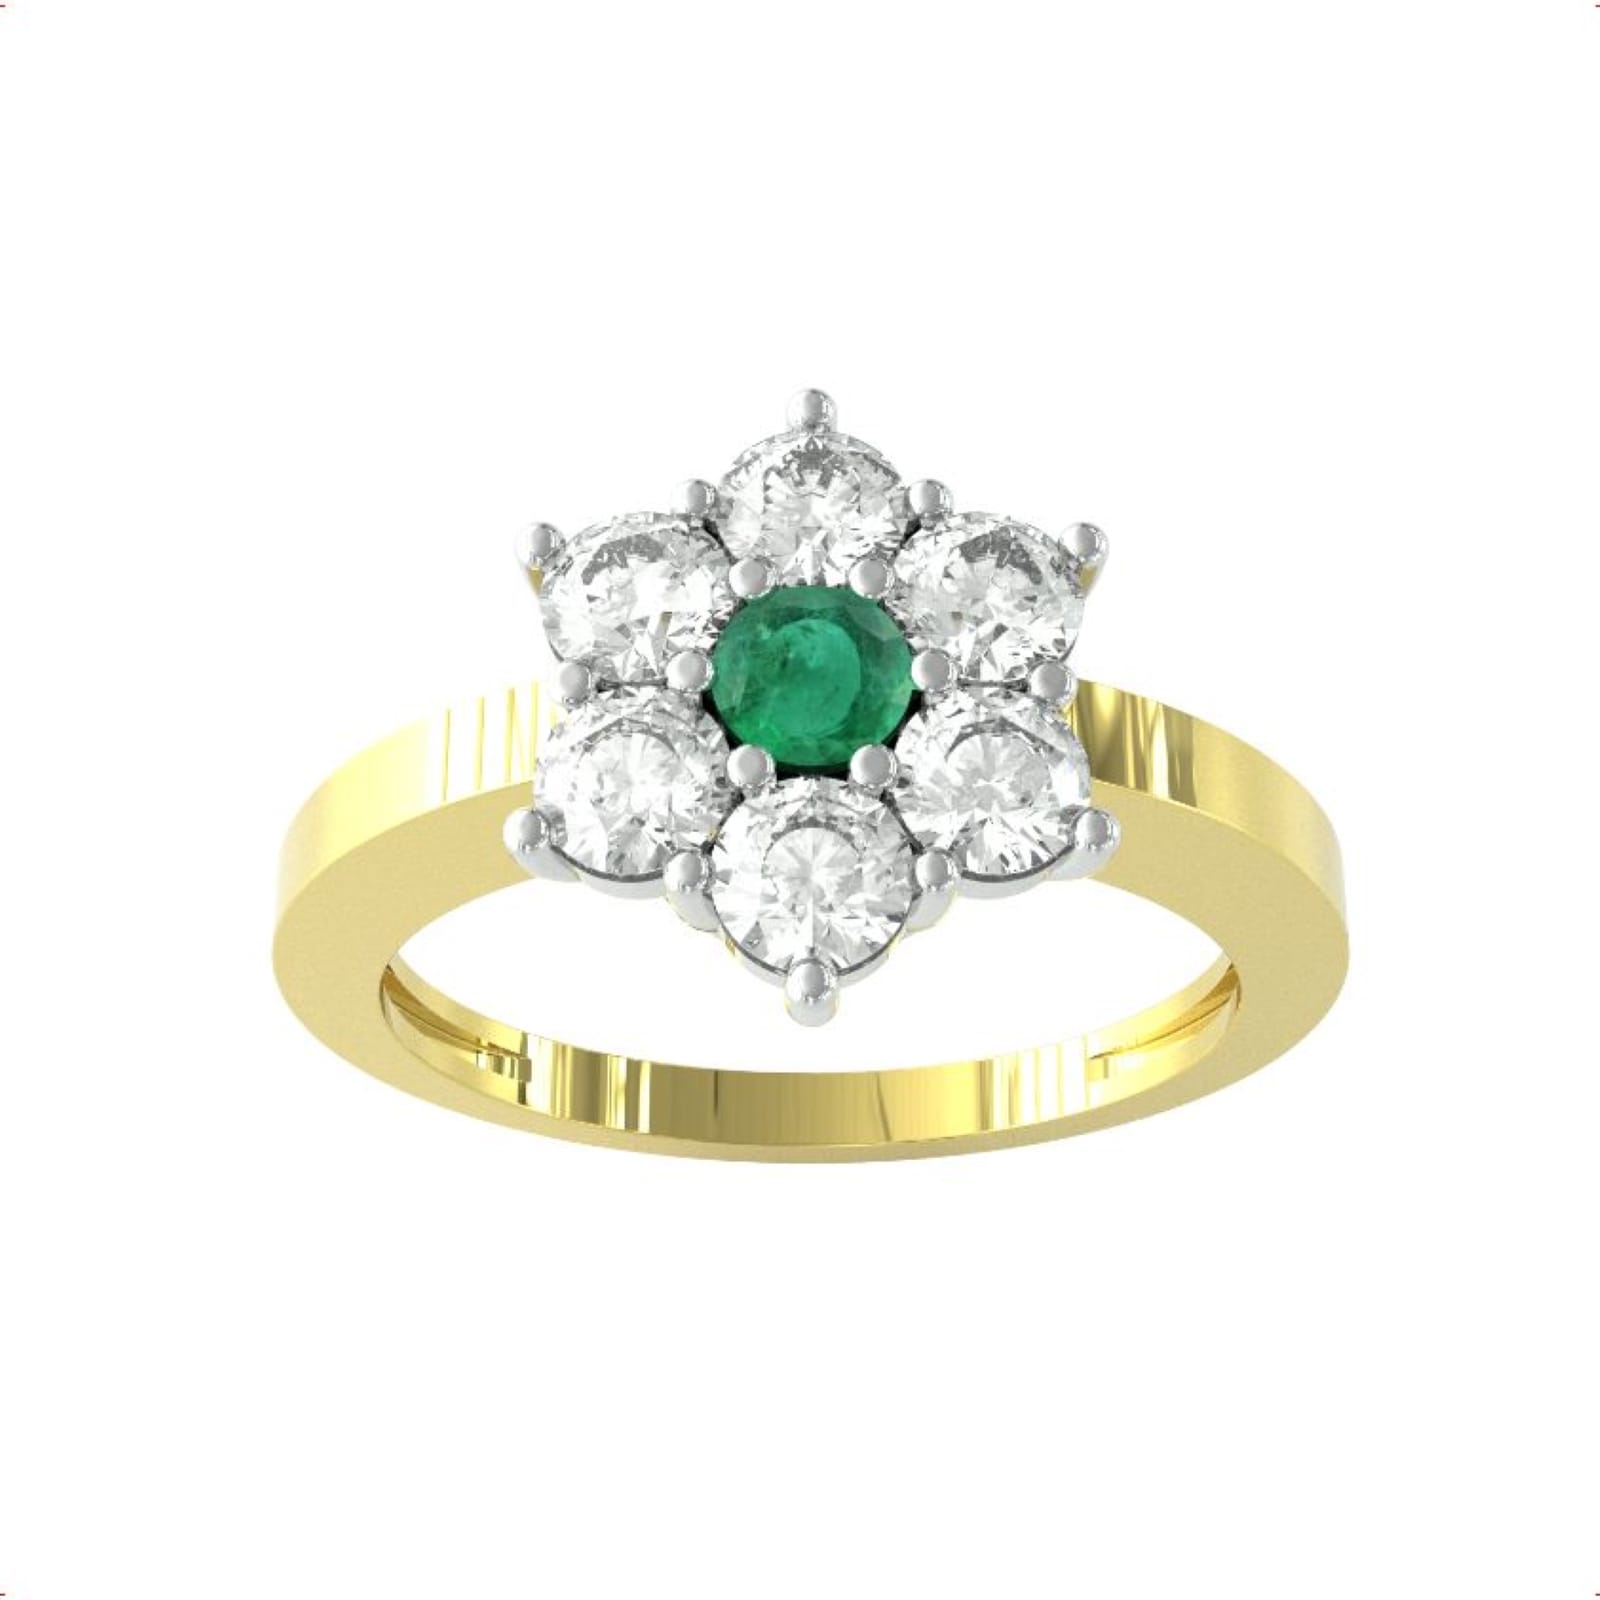 9ct Yellow Gold Emerald & Diamond Cluster Ring - Ring Size L.5